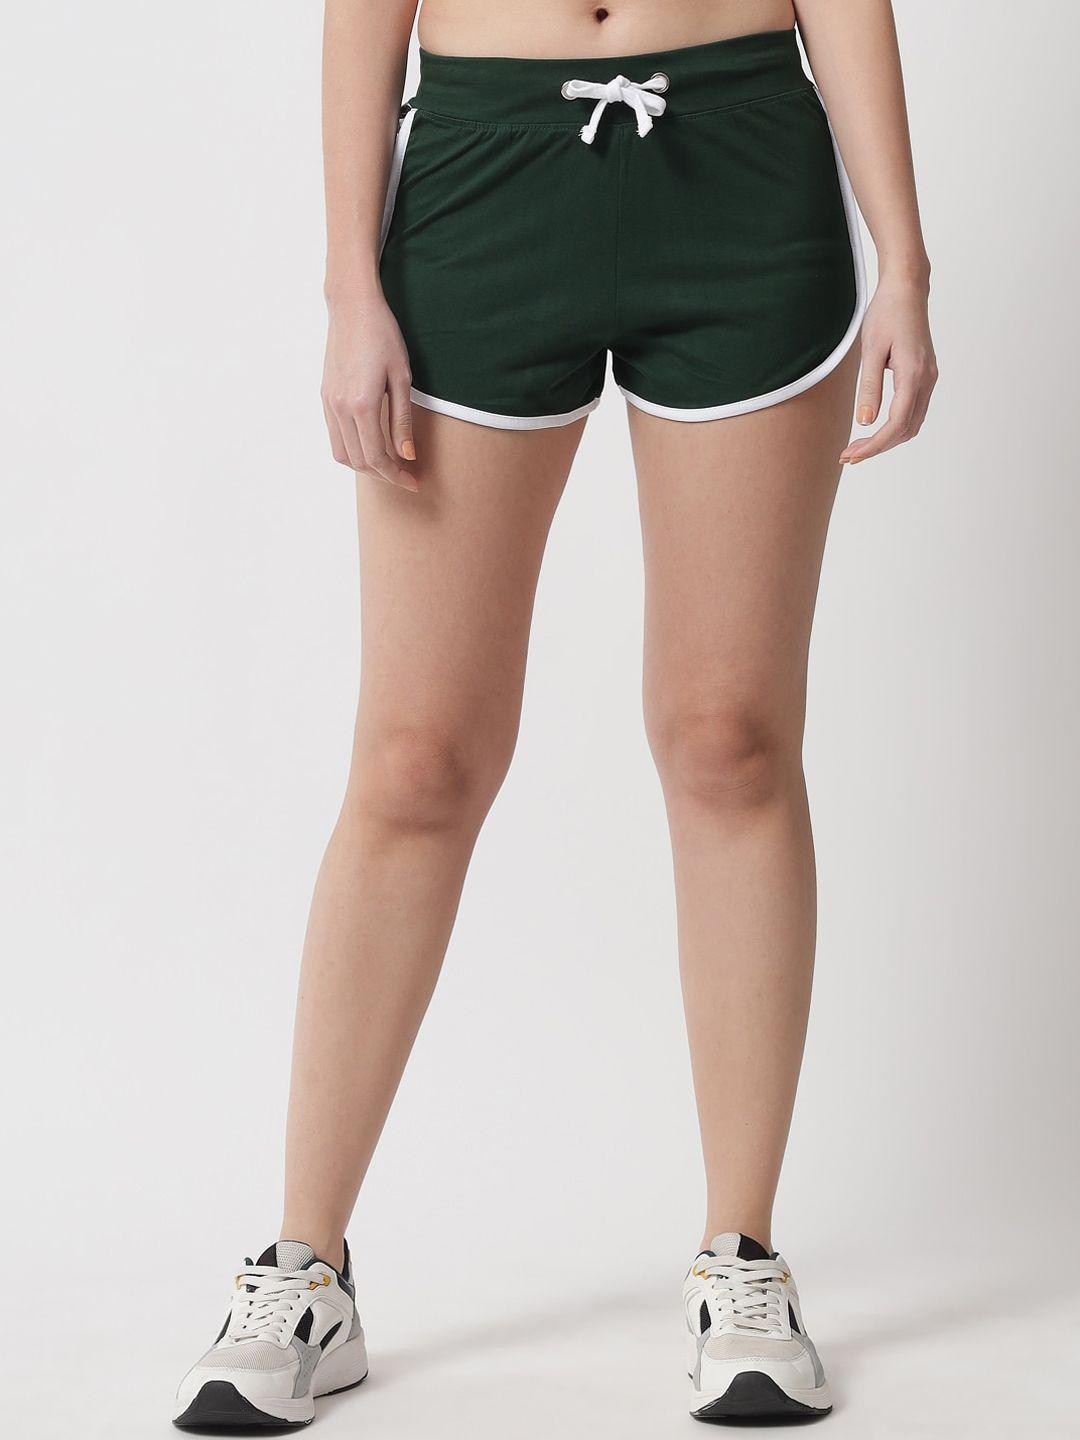 the-dry-state-women-green-loose-fit-outdoor-hot-pants-cotton-shorts